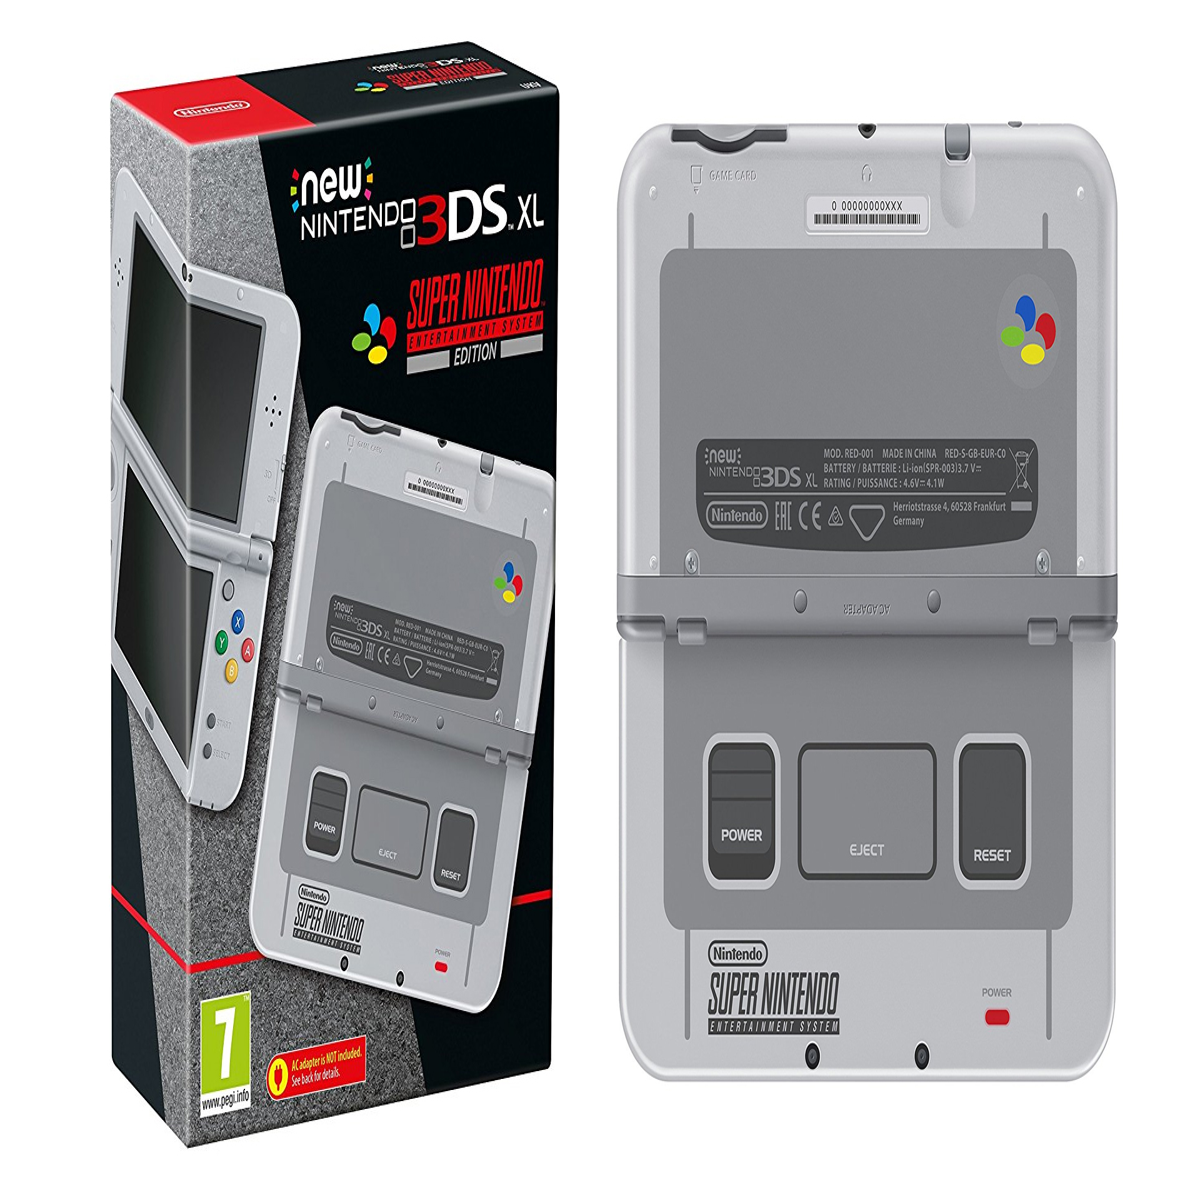 lektier Forfølge organ New Nintendo 3DS XL SNES Edition up for pre-order now | VG247